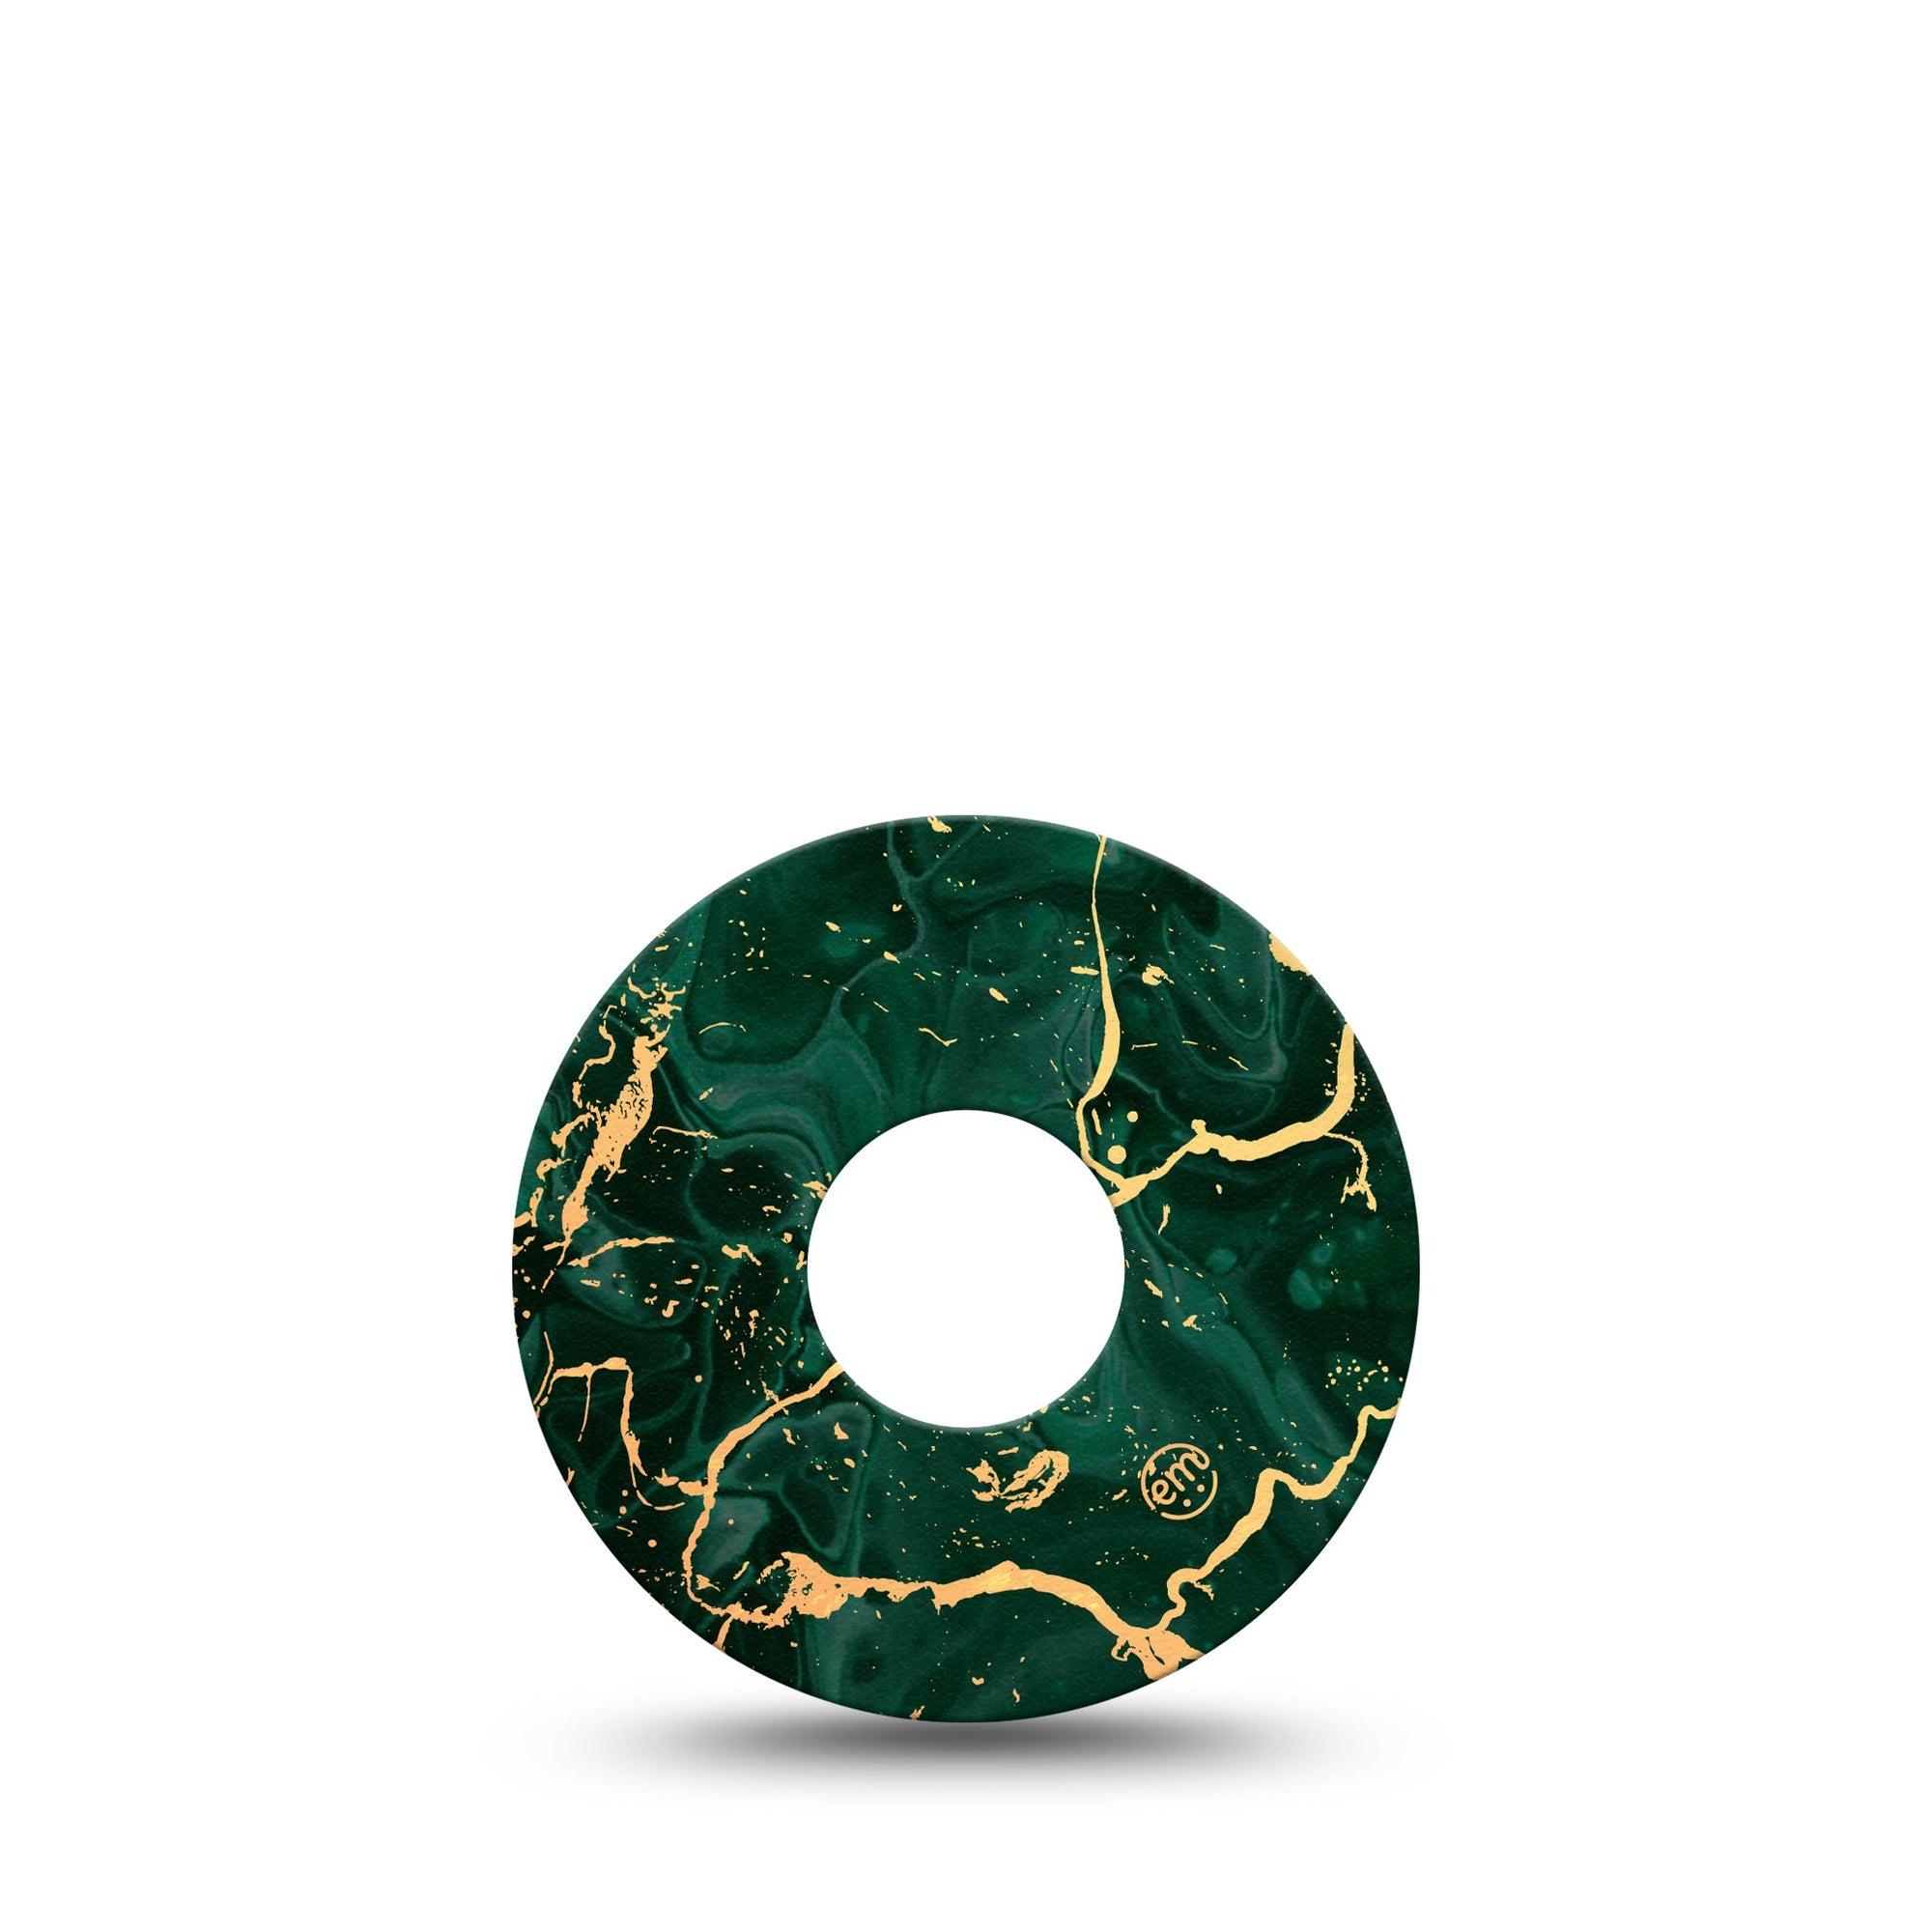 ExpressionMed Green & Gold Marble Libre 3 Tape Malachite With Gold Stain, CGM Plaster Patch Design